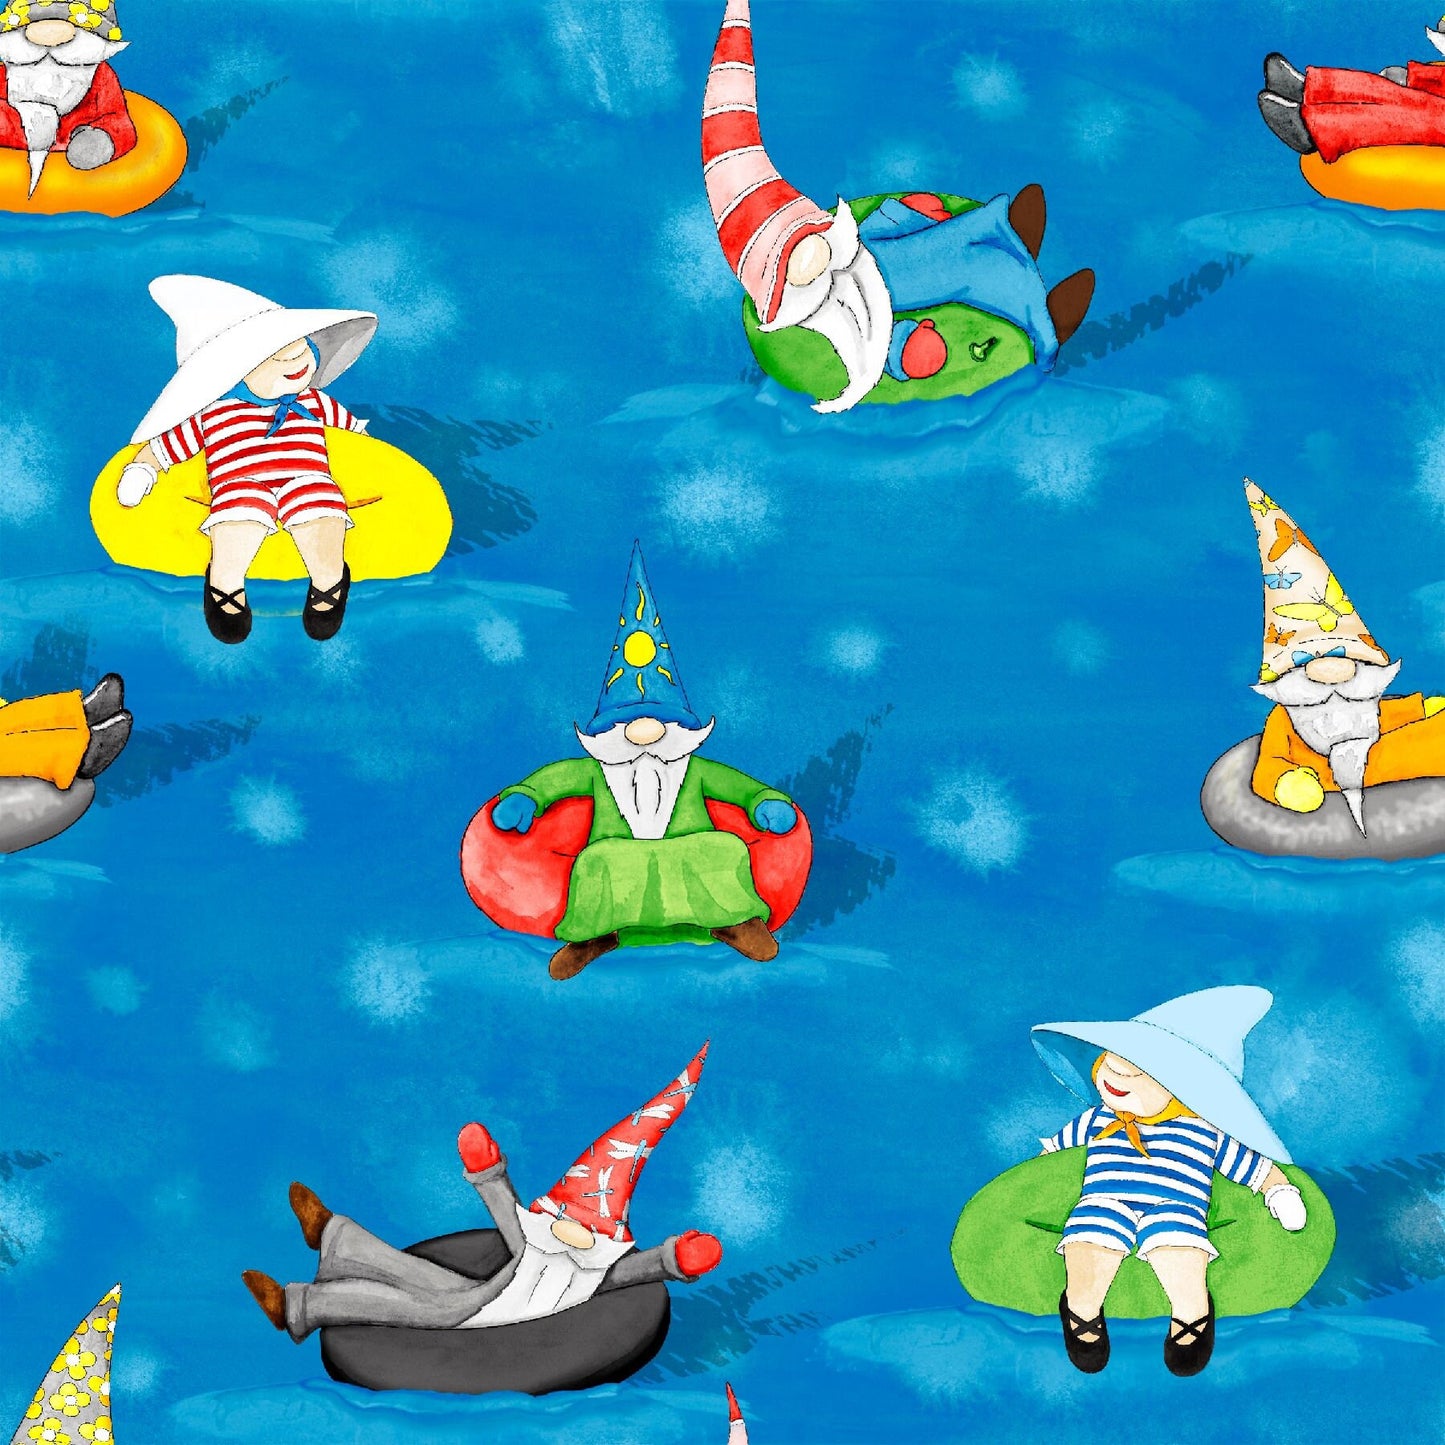 Hangin' With My Gnomies by Hugo Edwins Gnomes in Waterpark Med Blue 1446-75 Cotton Woven Fabric